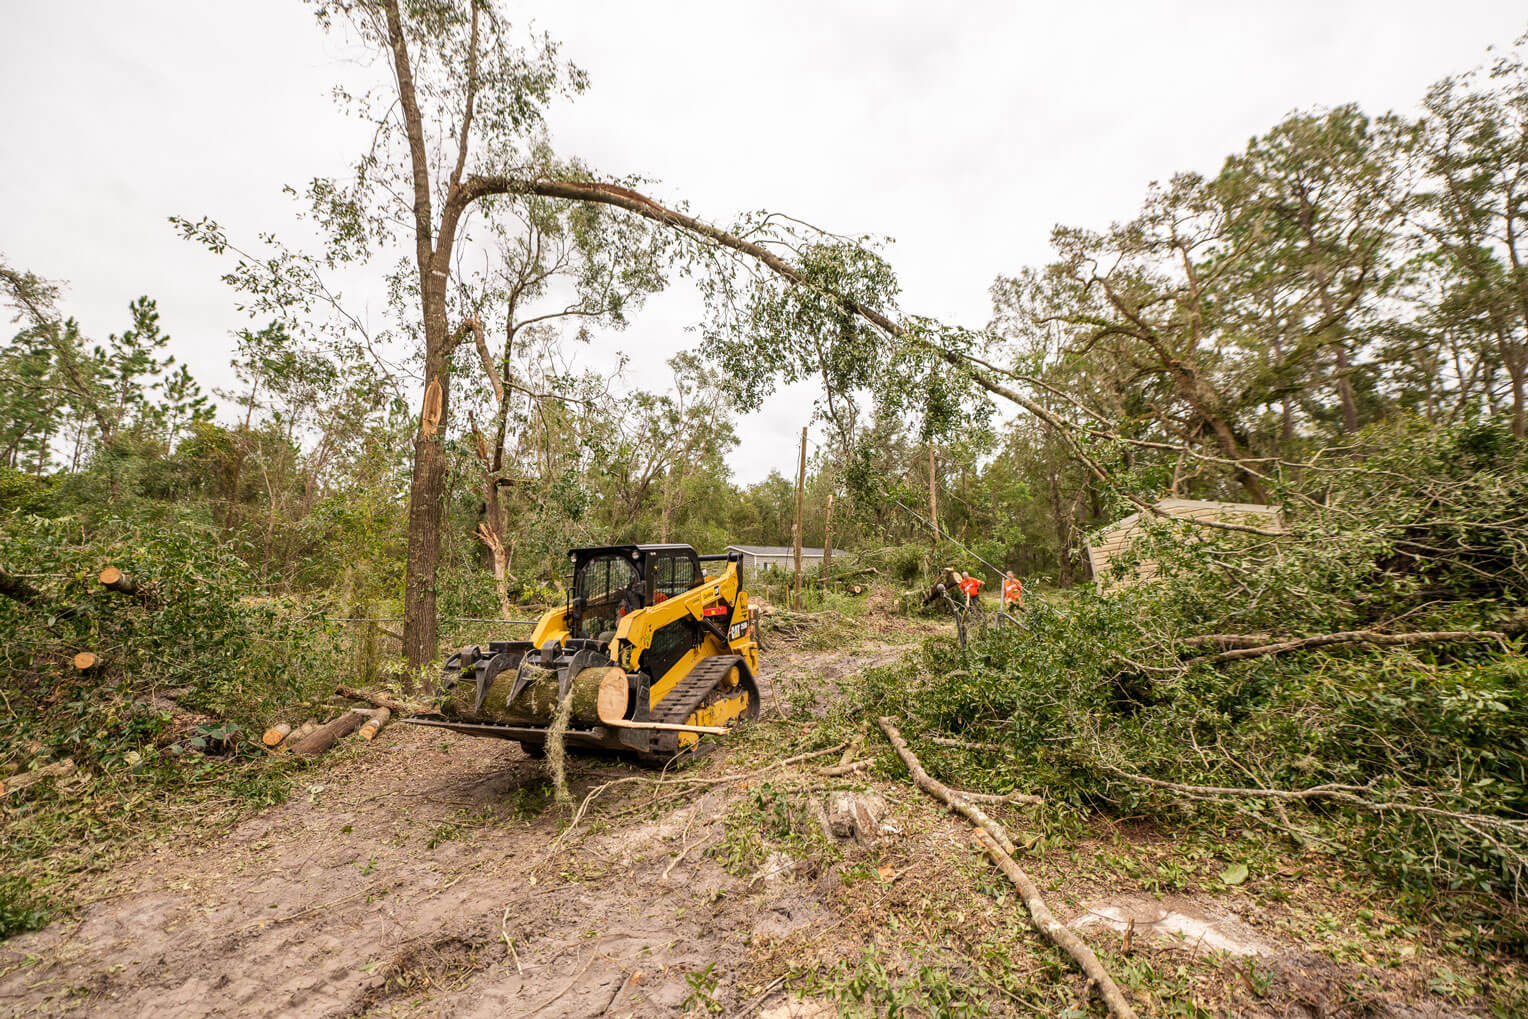 With skid steer and other machinery, our teams were able to cut and remove trees, clearing a path to the house.